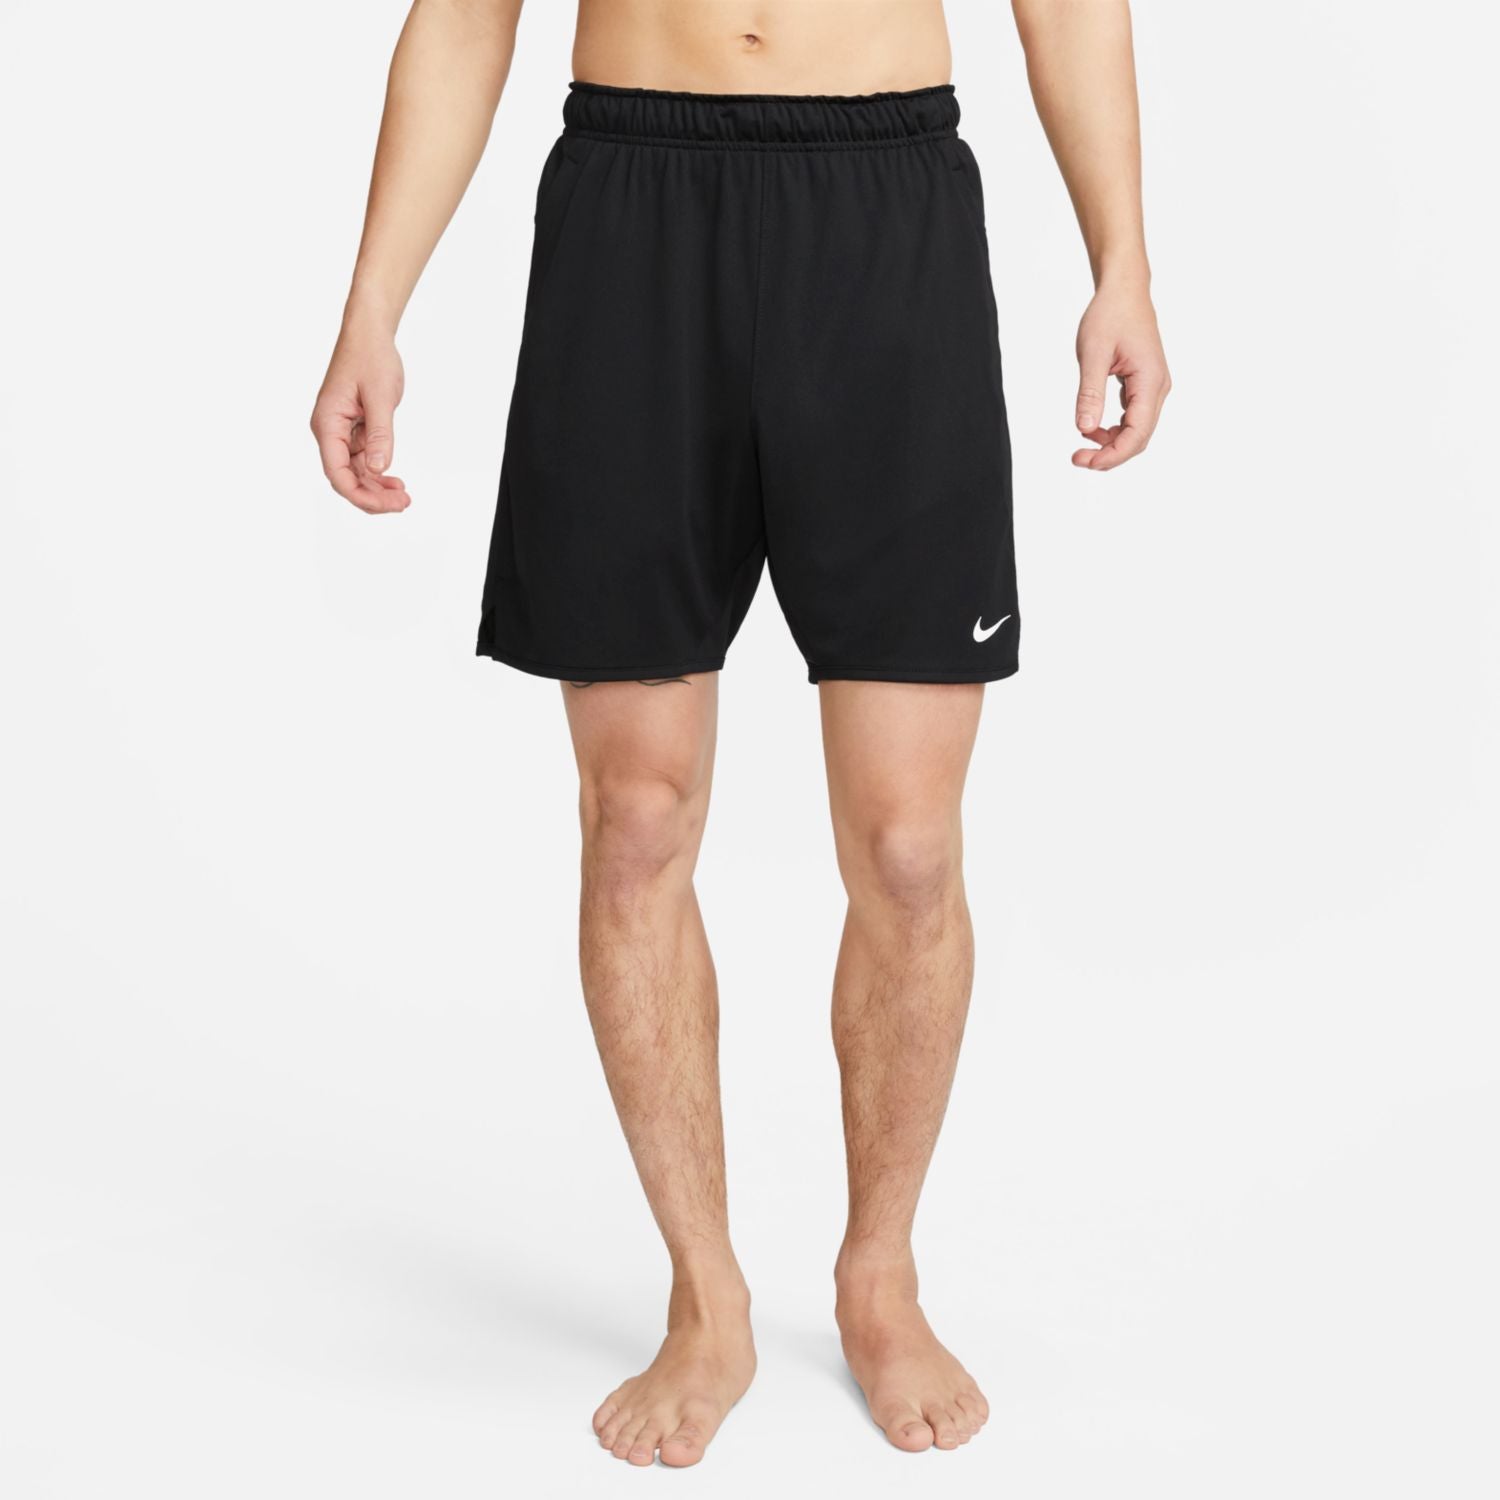 NIKE AS M NK DF TOTALTY KNT 7IN UL FB4197-010 SHORT TRAINING (M)-1